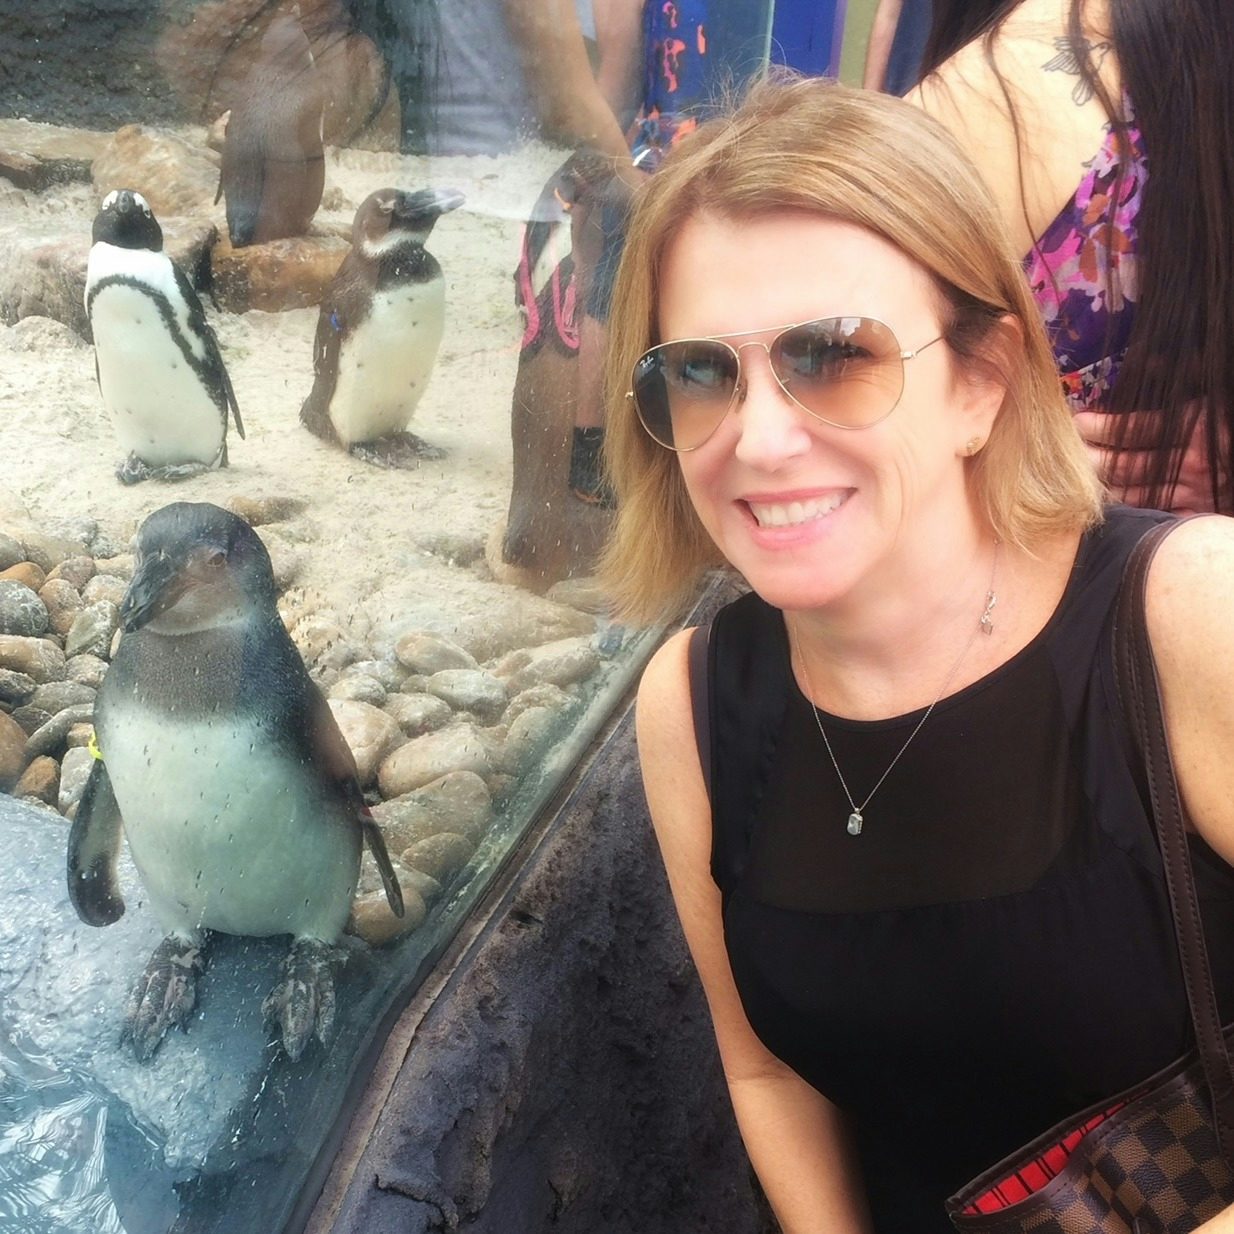 Carole Moore in a black top and sunglasses posing with penguins